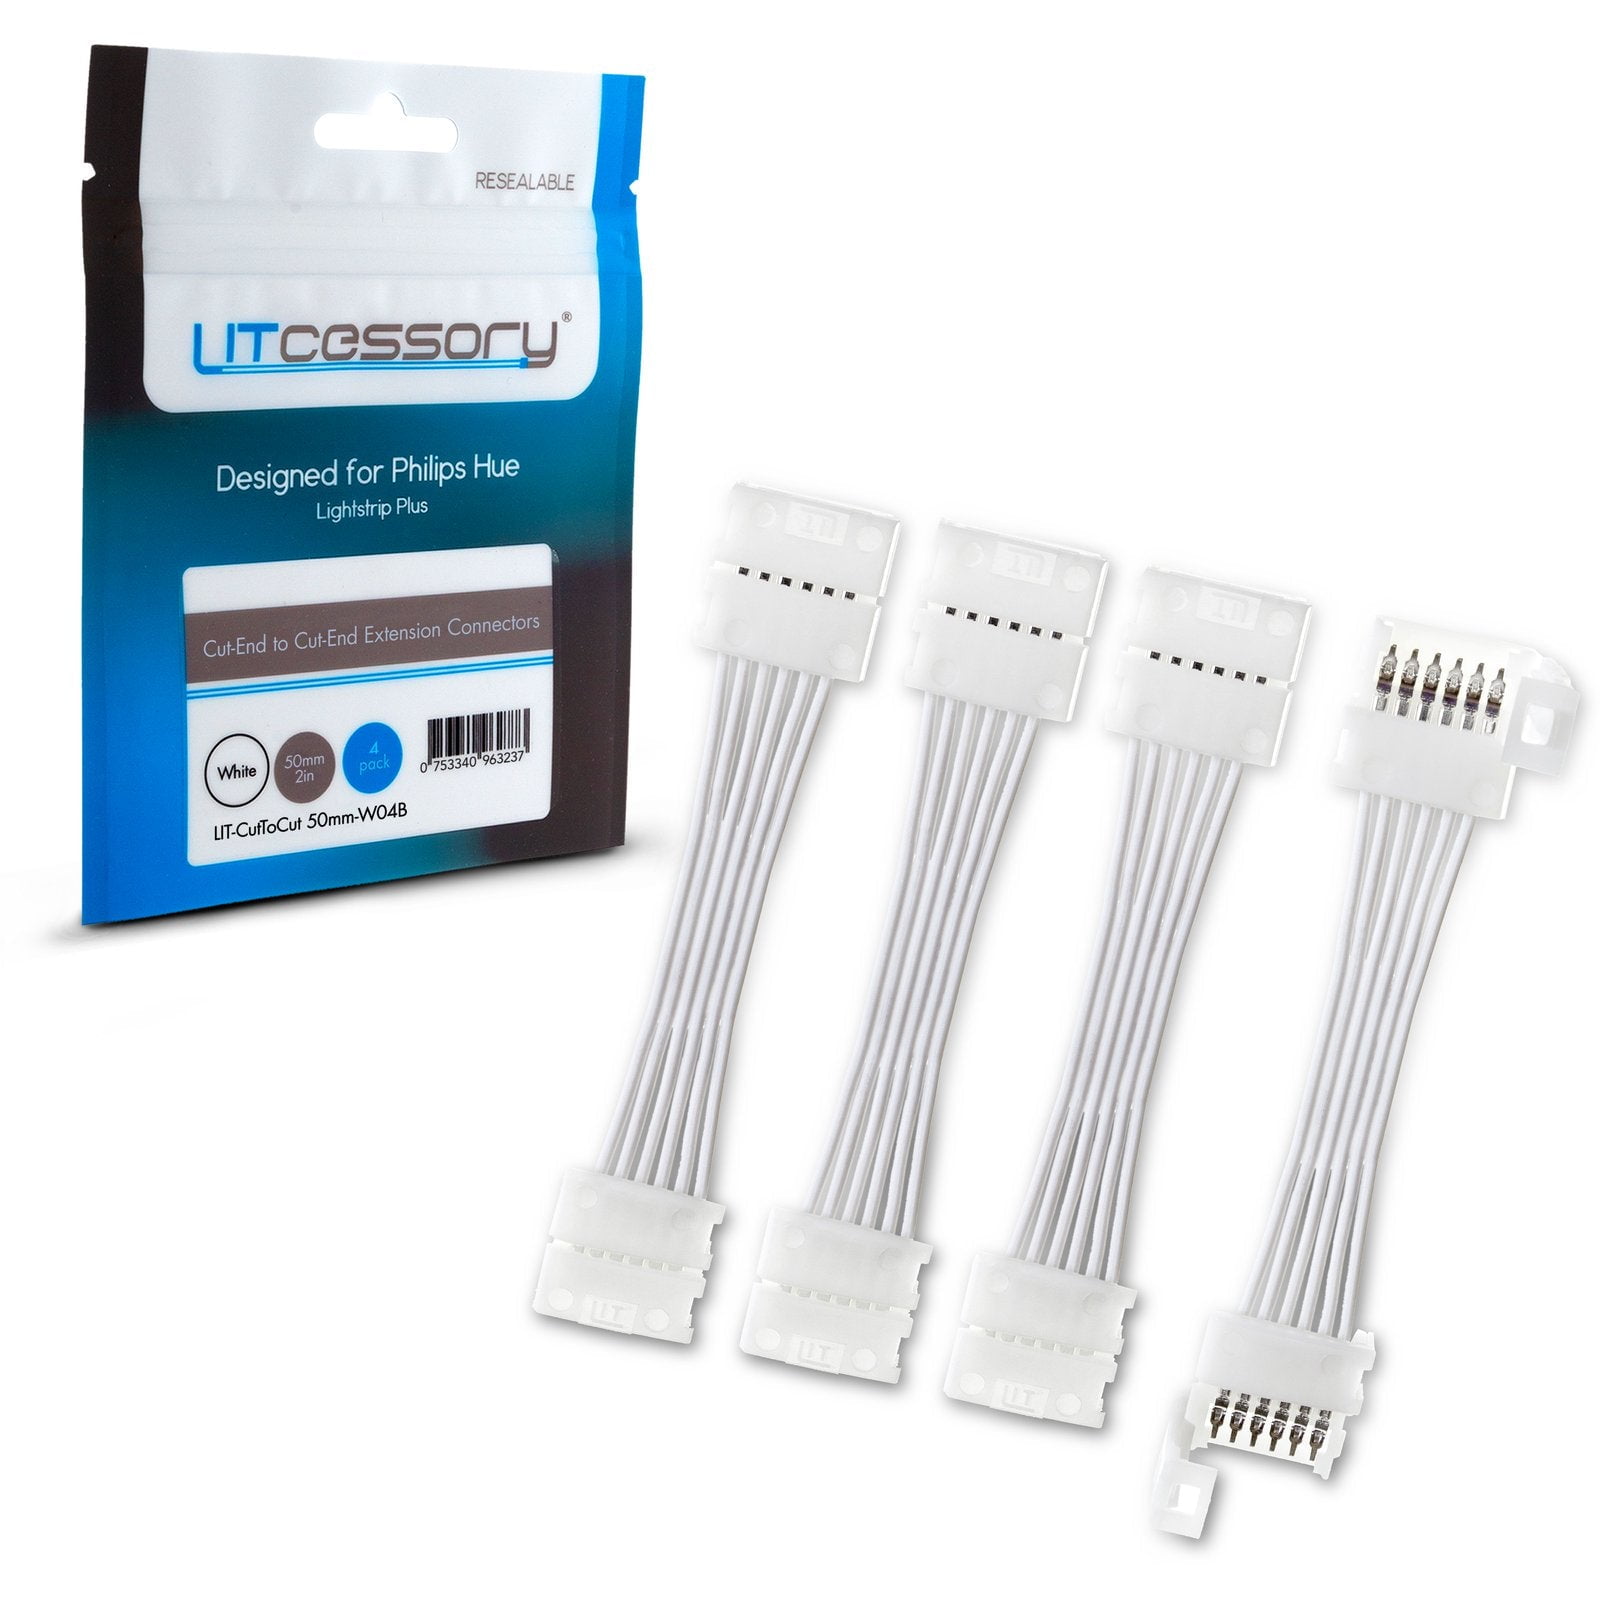 Litcessory Cut-End to Cut-End Extension Connector for Philips Hue Lightstrip Plus (2in, 4 Pack, White - STANDARD 6-PIN - Walmart.com